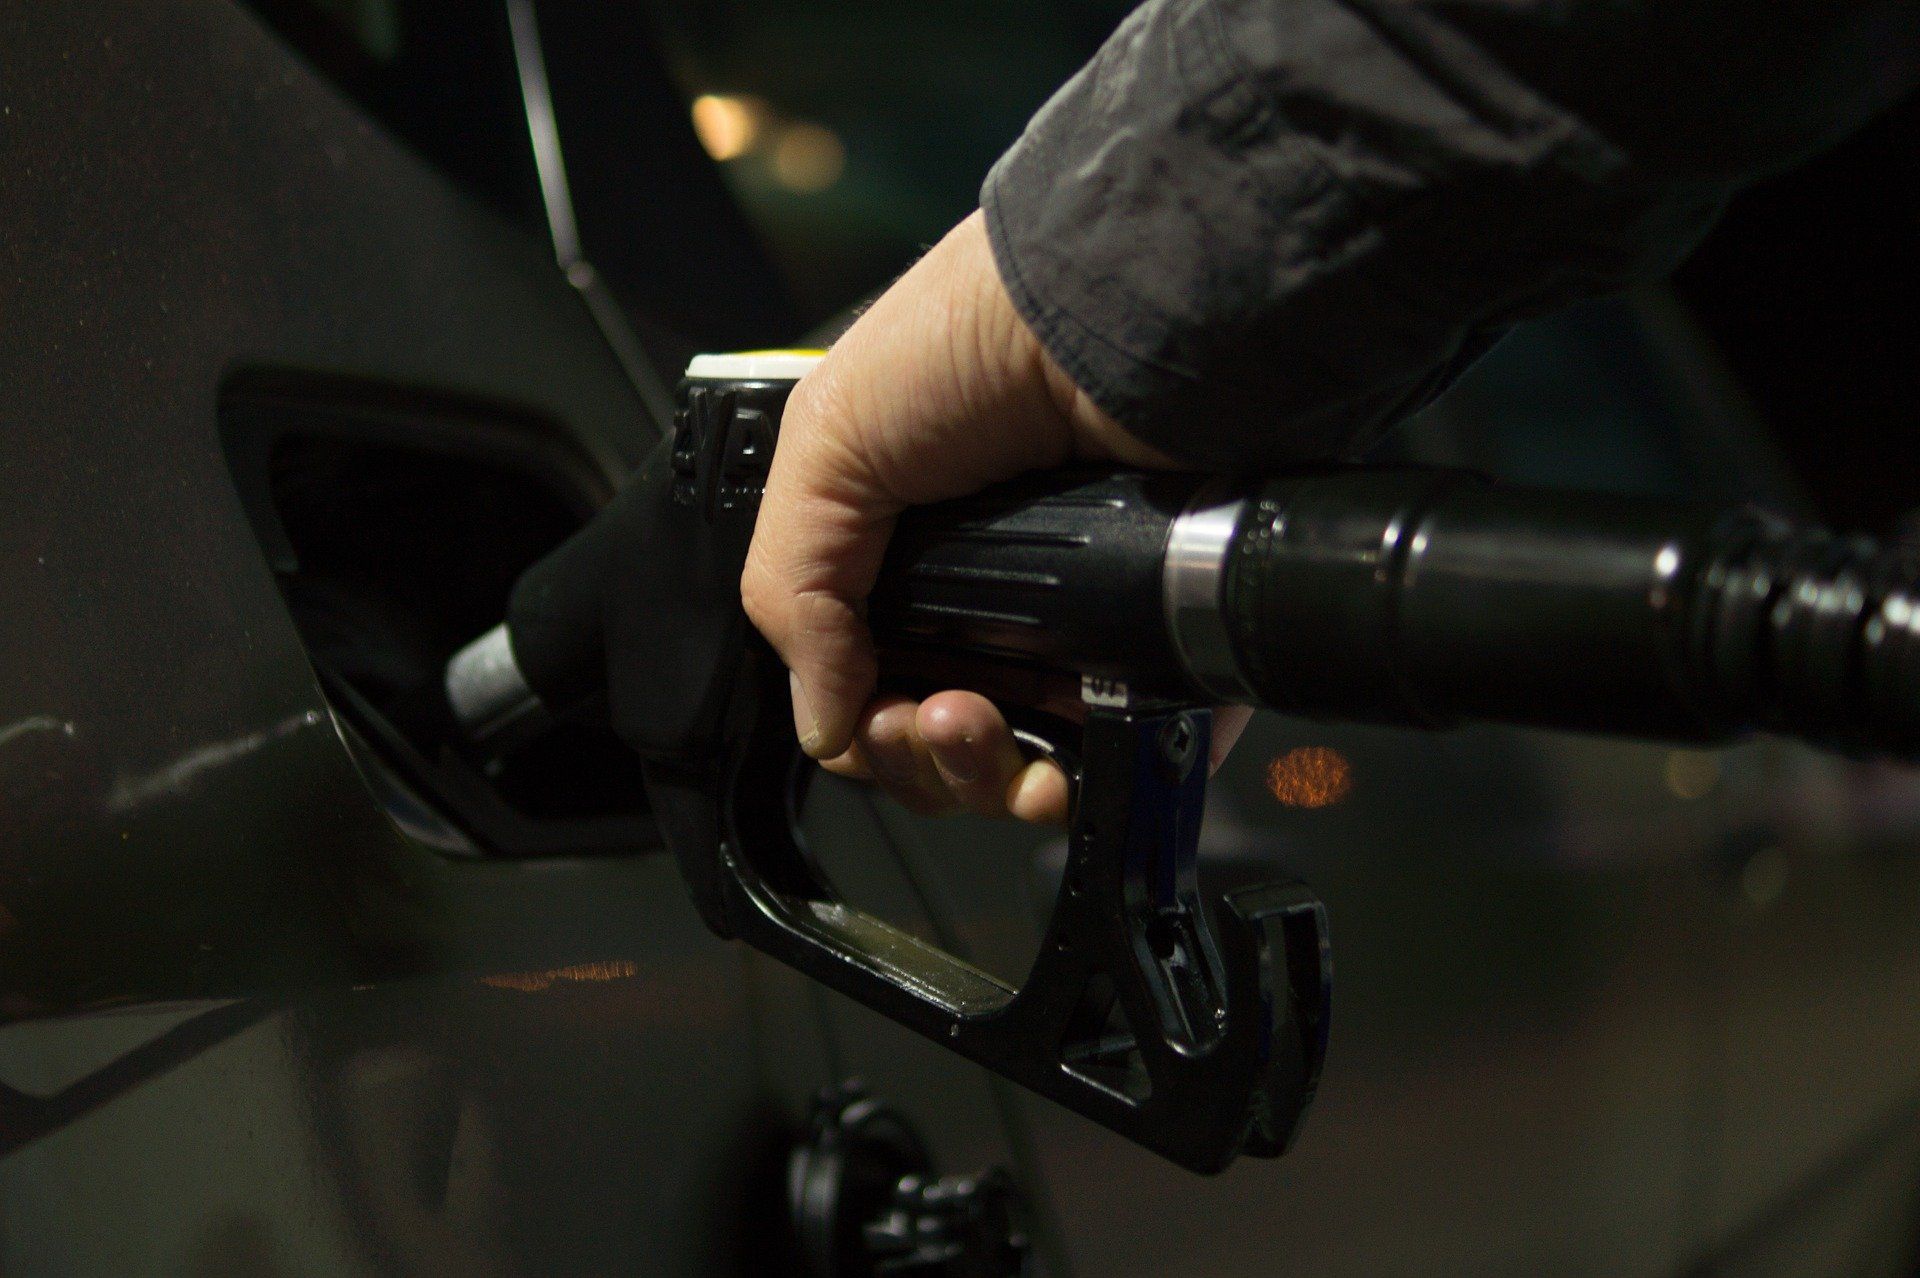 Fuel price hike: Petrol and Diesel rates increased by 80 paise on April 5